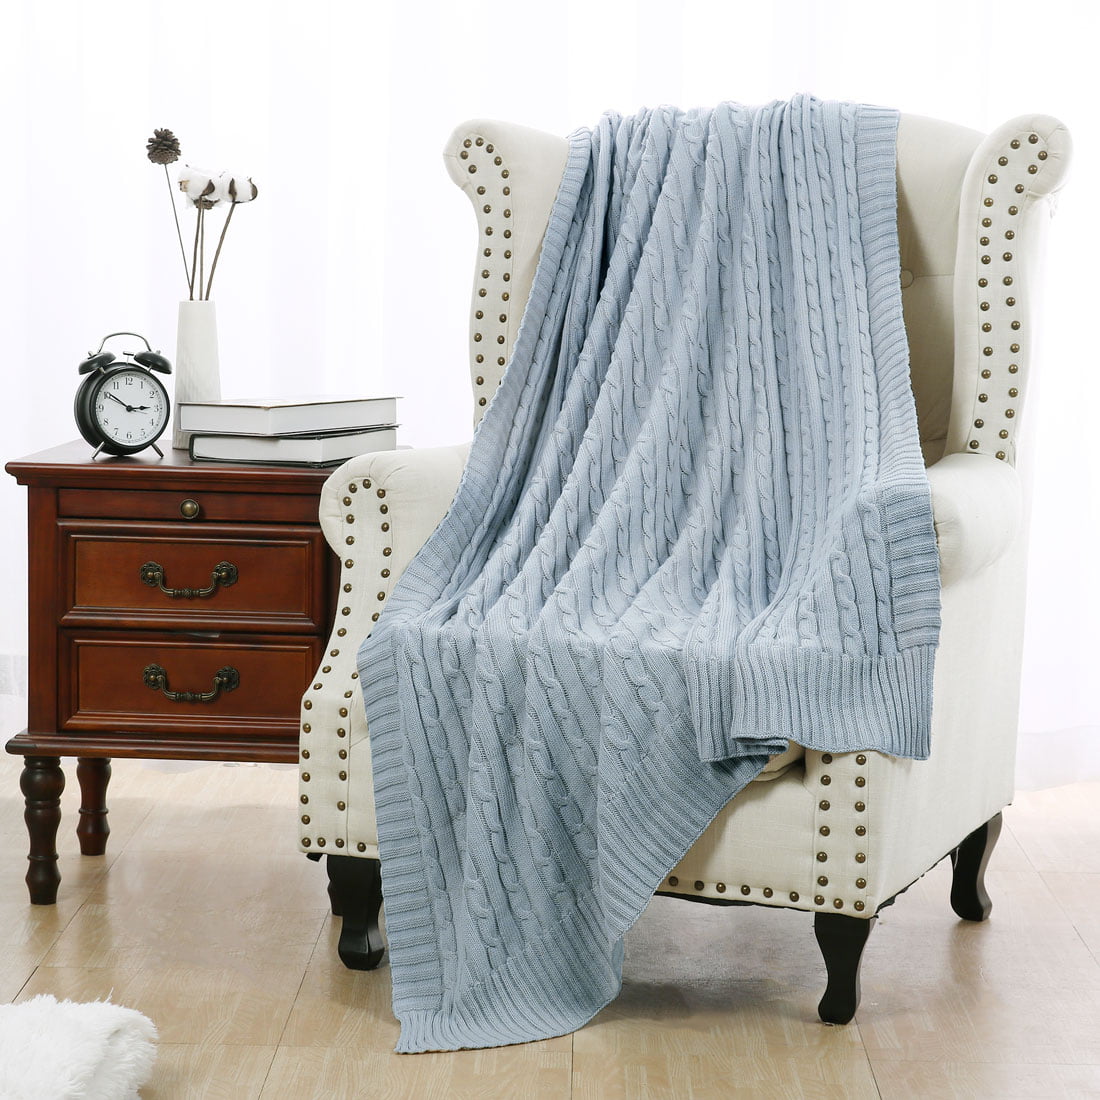 Cotton Knitted Throw Blanket Soft Warm Cable Knit Blanket